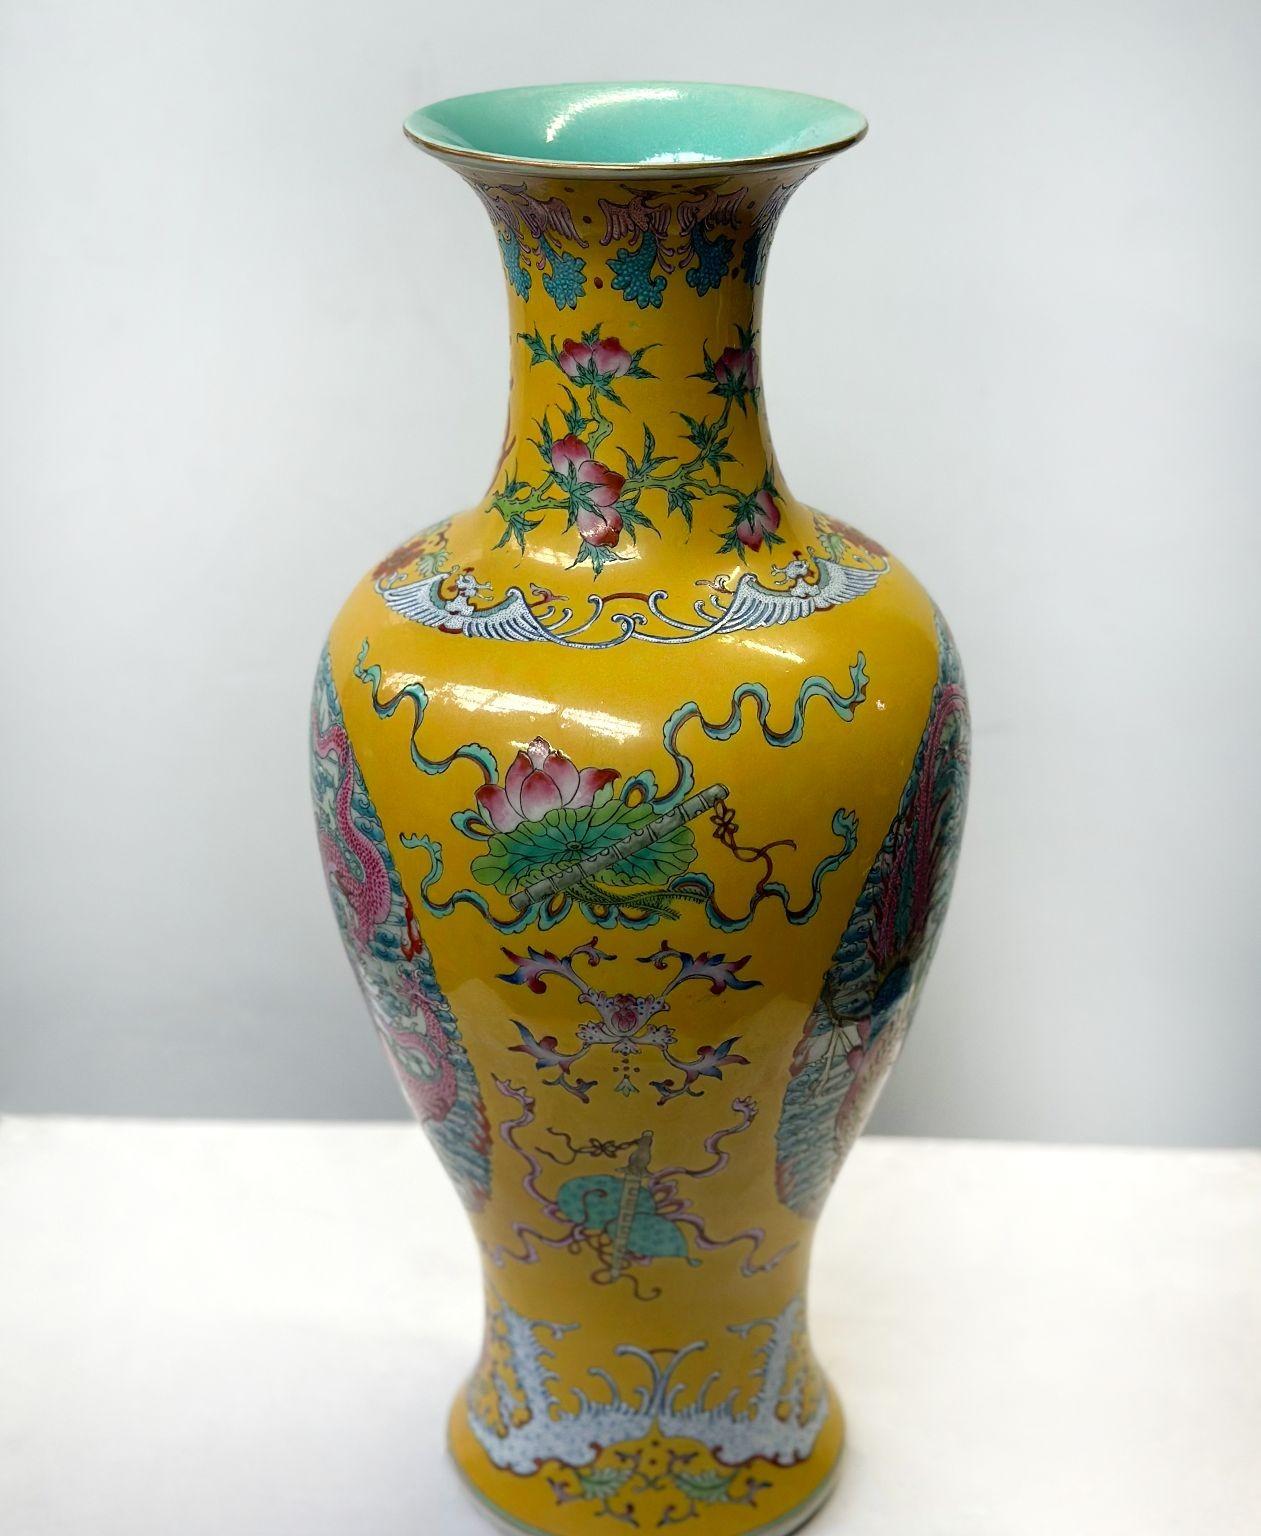 Traditional Chinese Famille Jaune porcelain vase in baluster form with beautiful botanical depictions along with dragon figures all around and other mythical creatures surrounding the piece. The vase is made of a bright yellow color and red, blue,